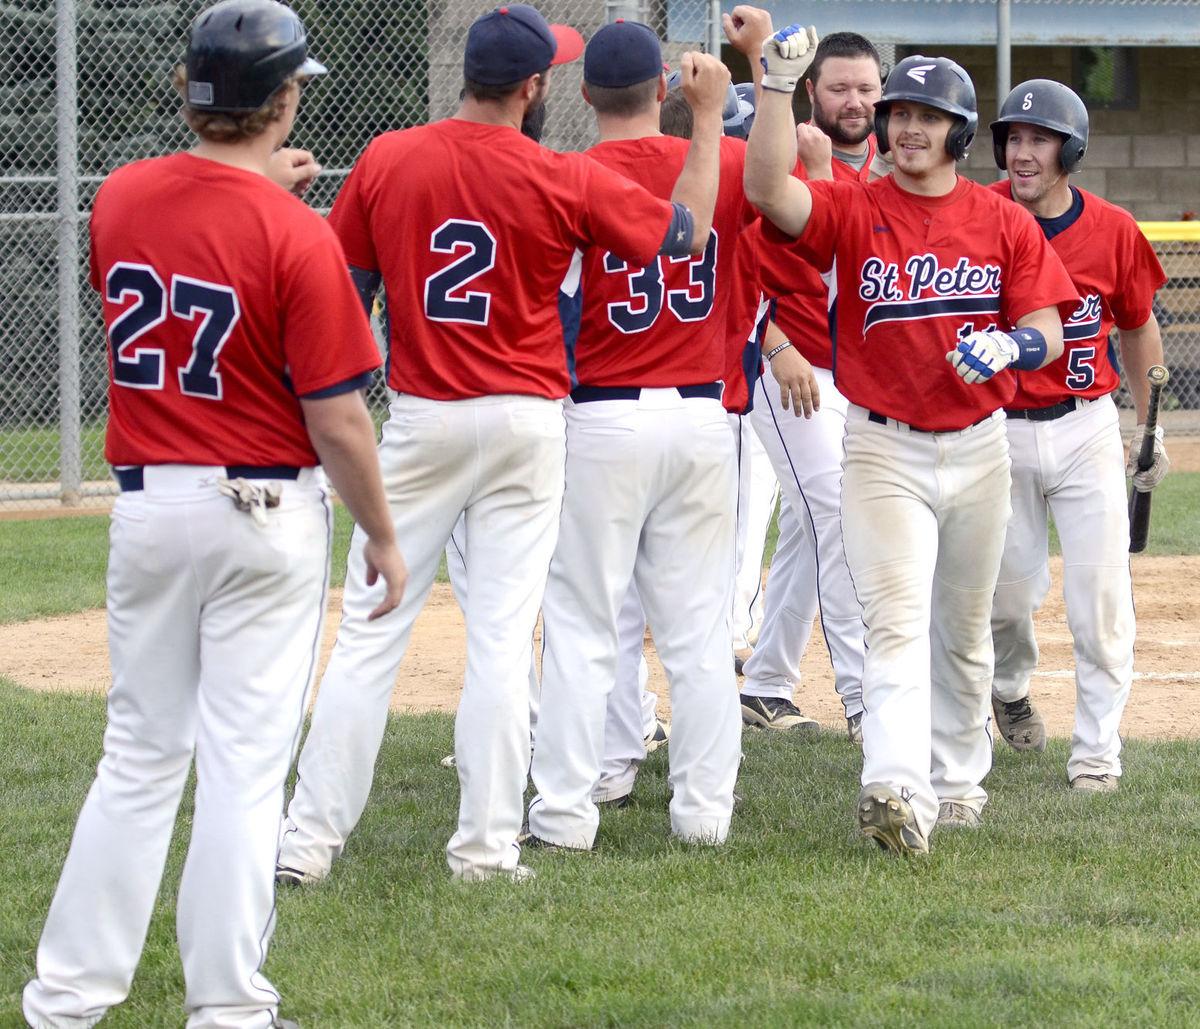 Saints Power Past Braves 10-3 To Make State For 4th Straight Year